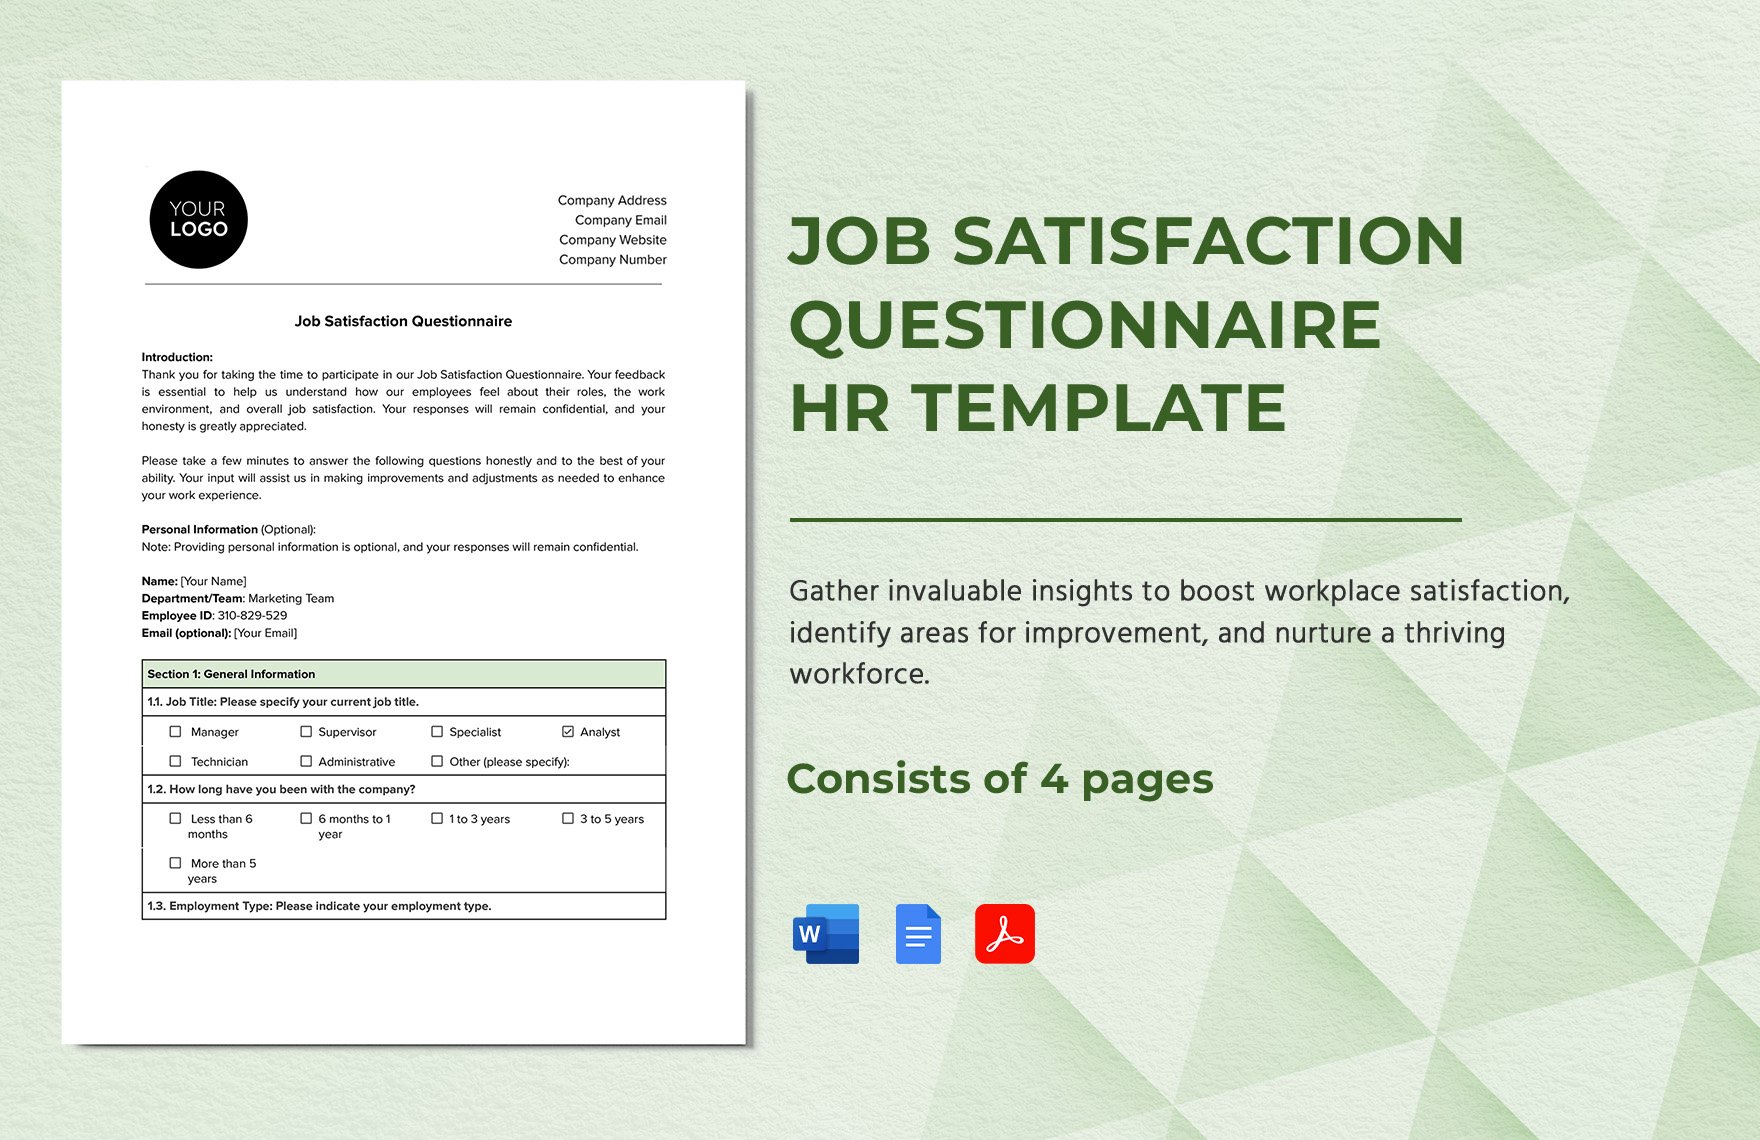 Job Satisfaction Questionnaire HR Template in Word, Google Docs, PDF